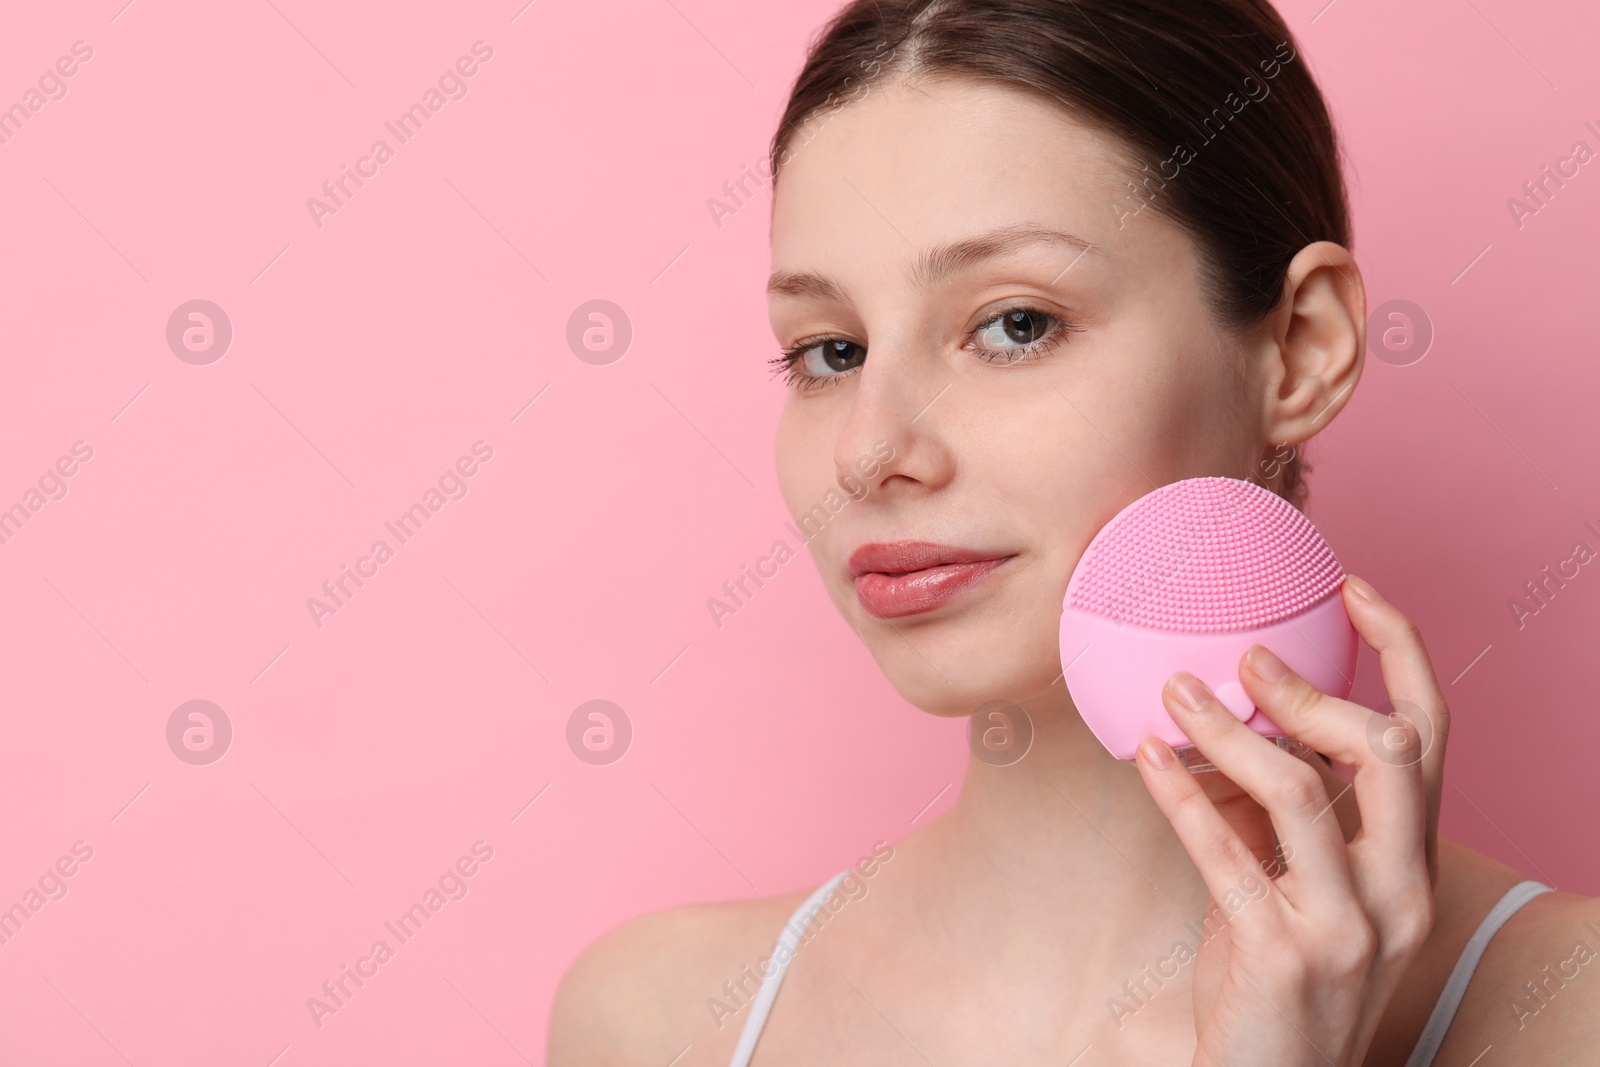 Photo of Washing face. Young woman with cleansing brush on pink background, space for text